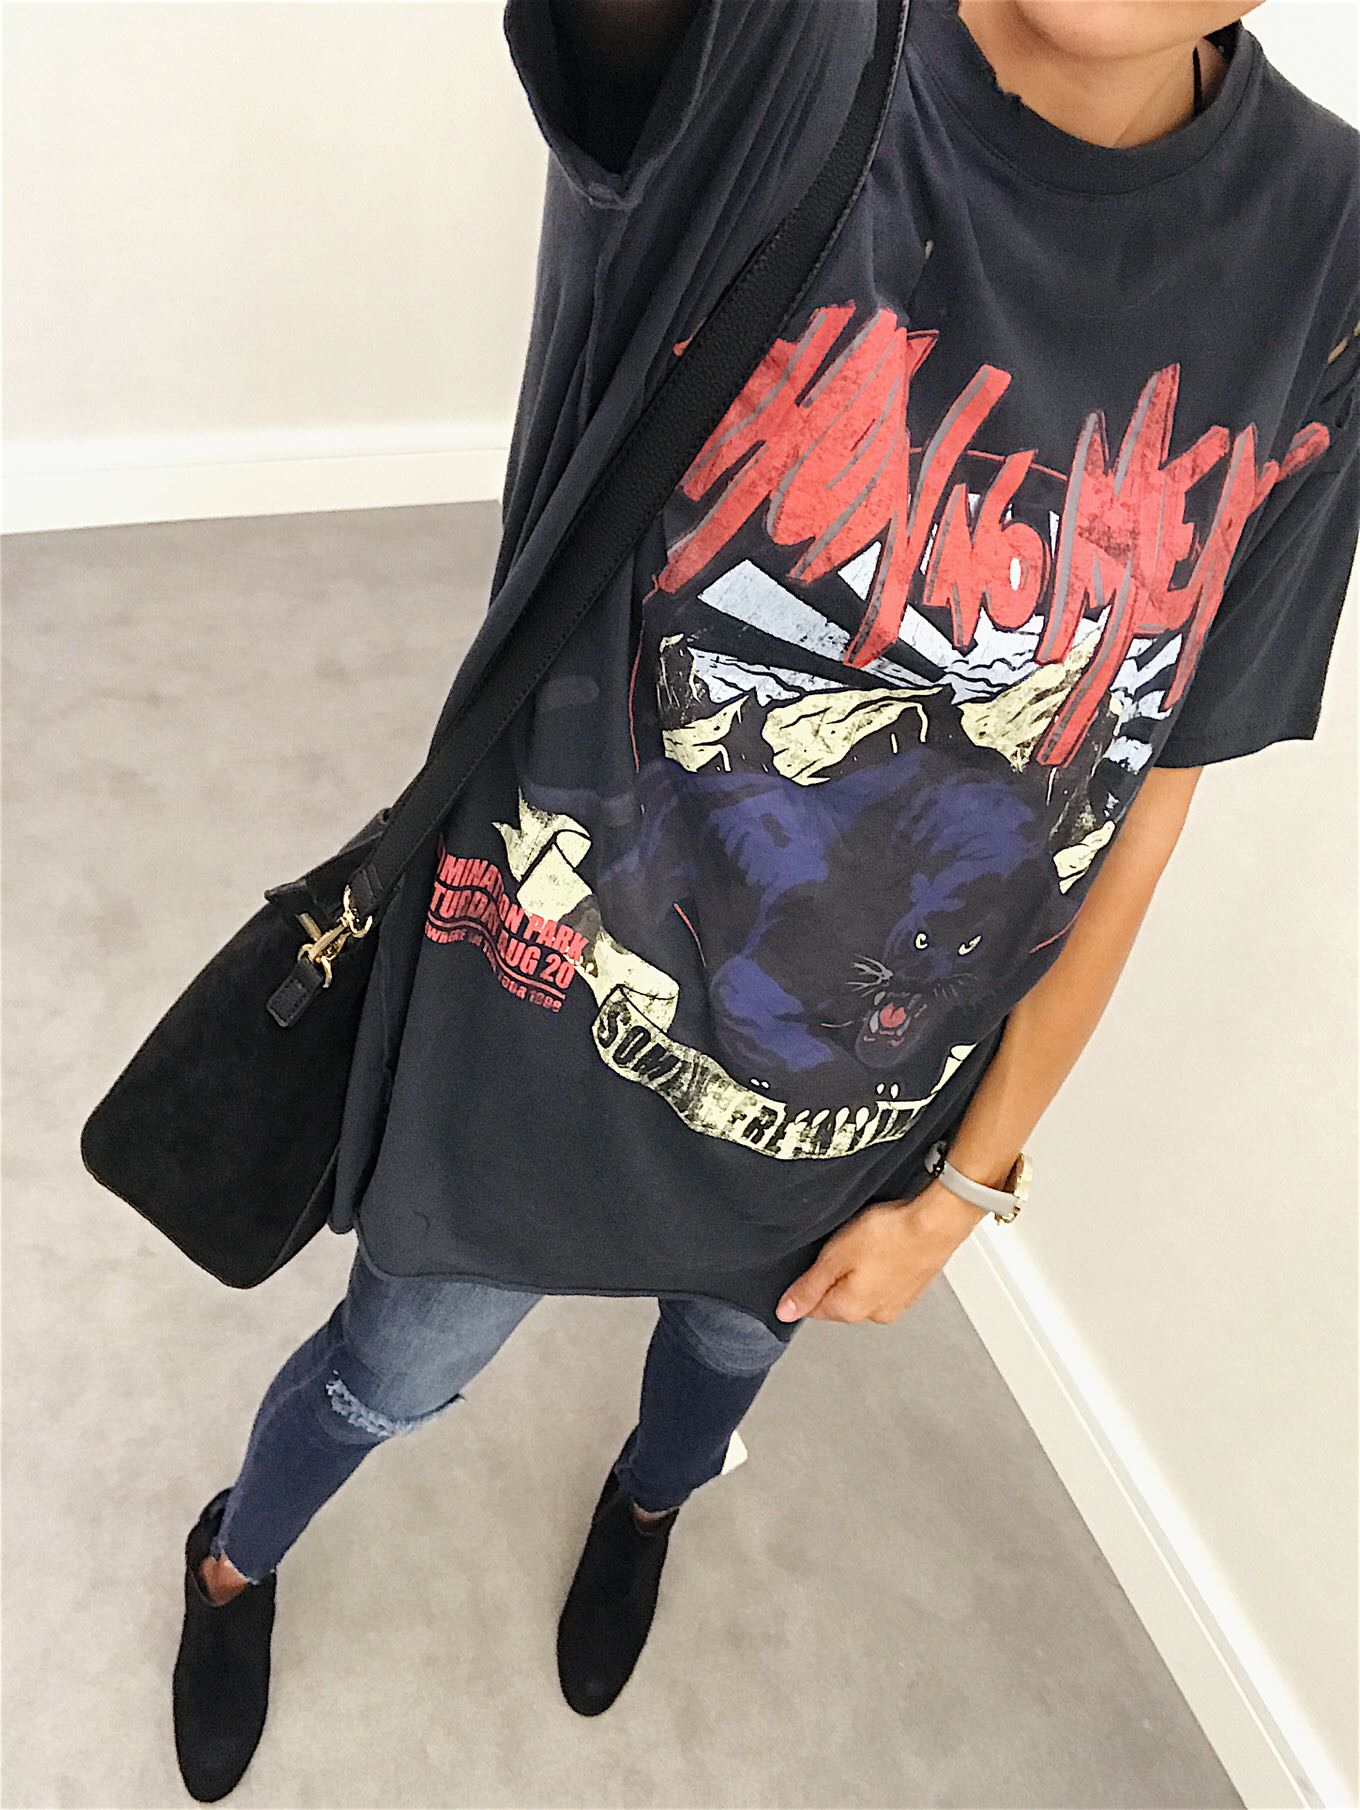 graphic tee style